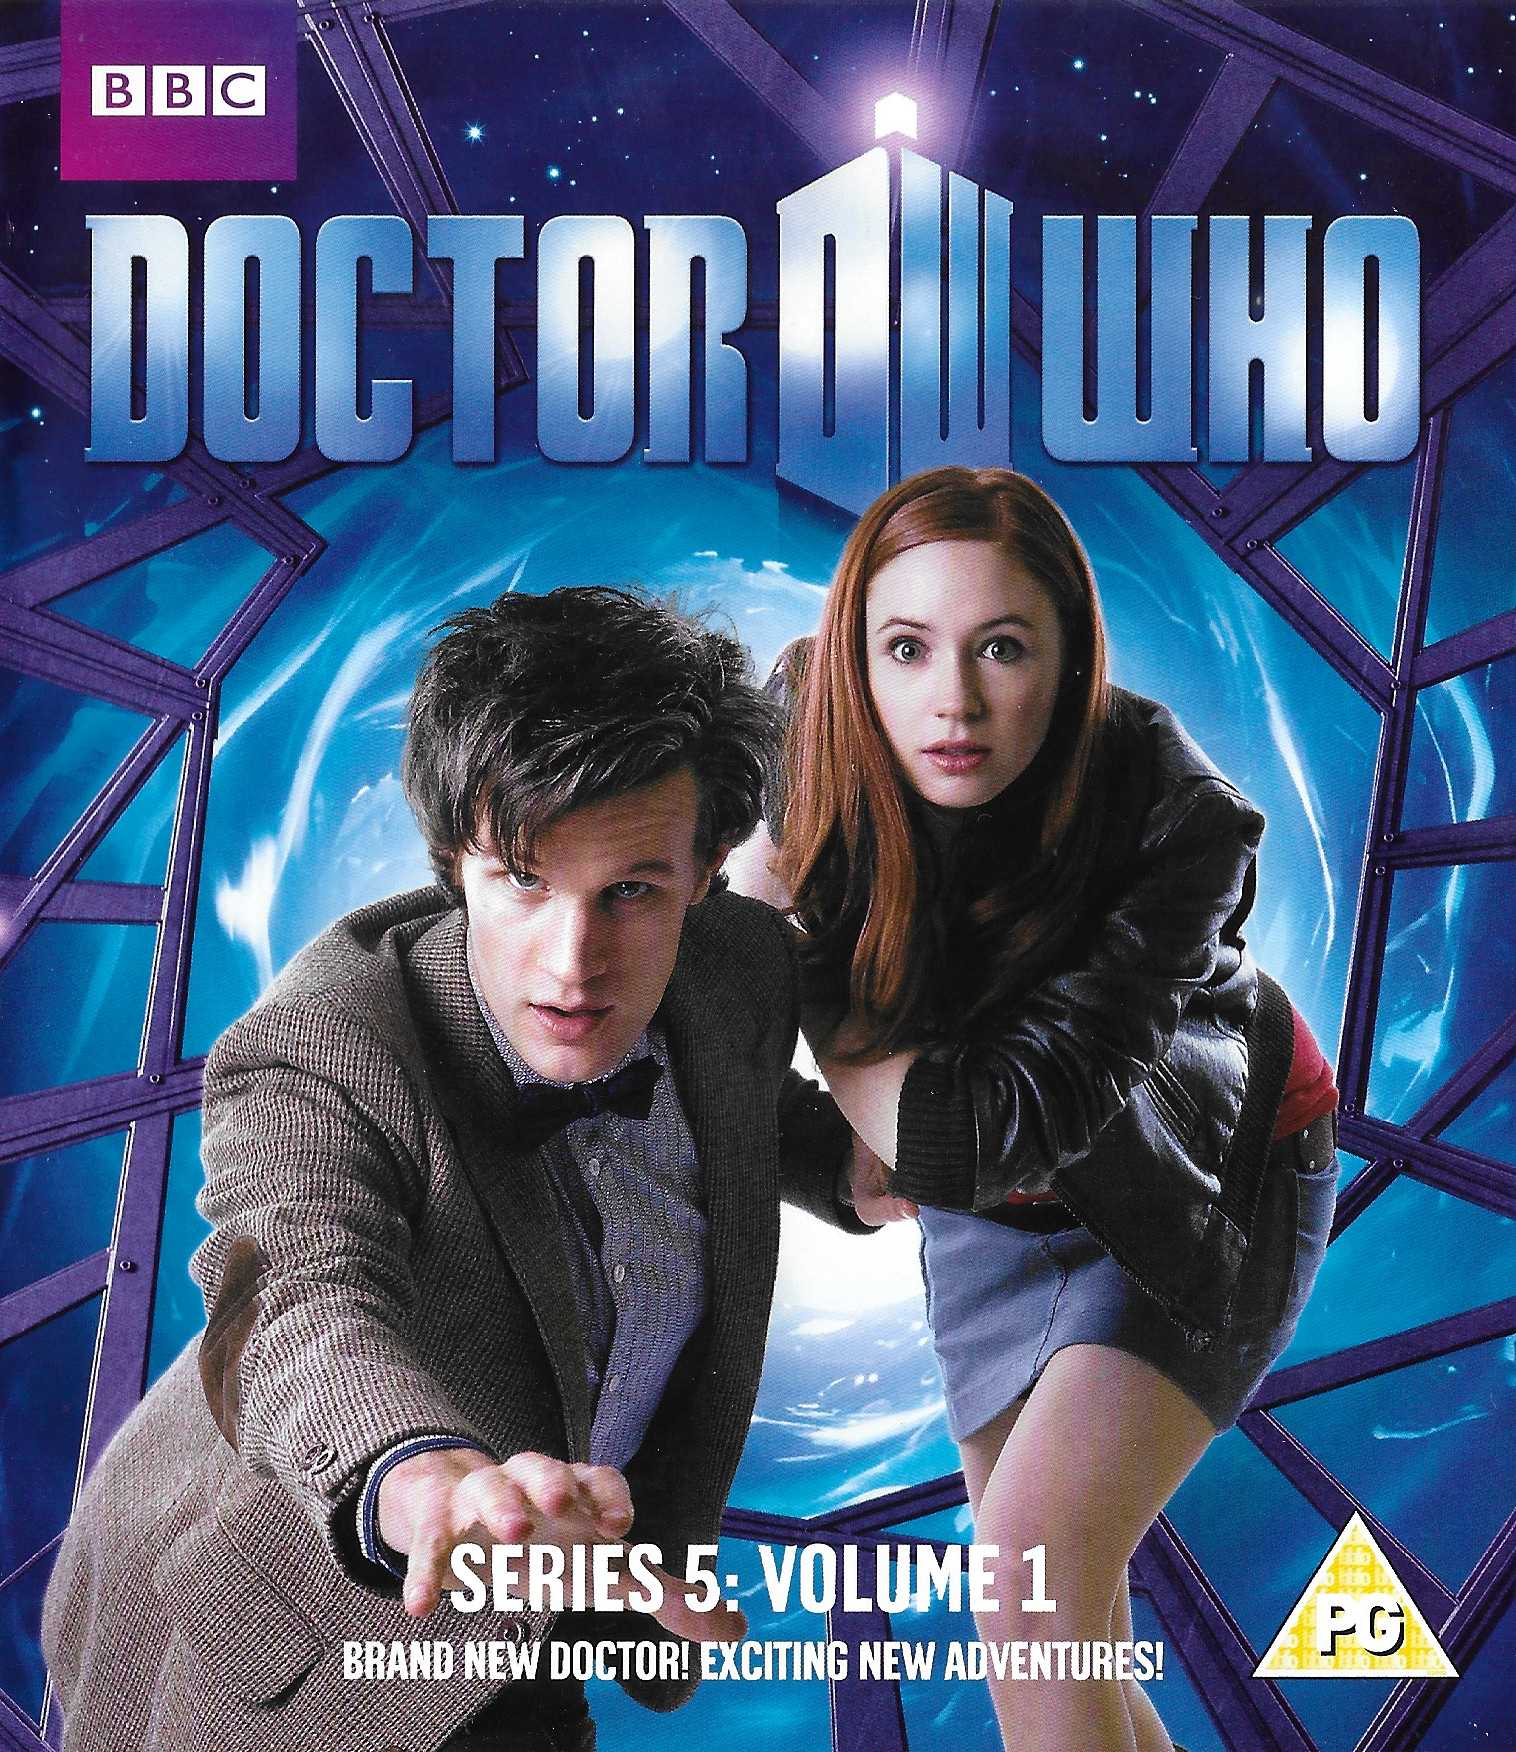 Picture of Doctor Who - Series 5, volume 1 by artist Steven Moffat / Mark Gatiss from the BBC blu-rays - Records and Tapes library